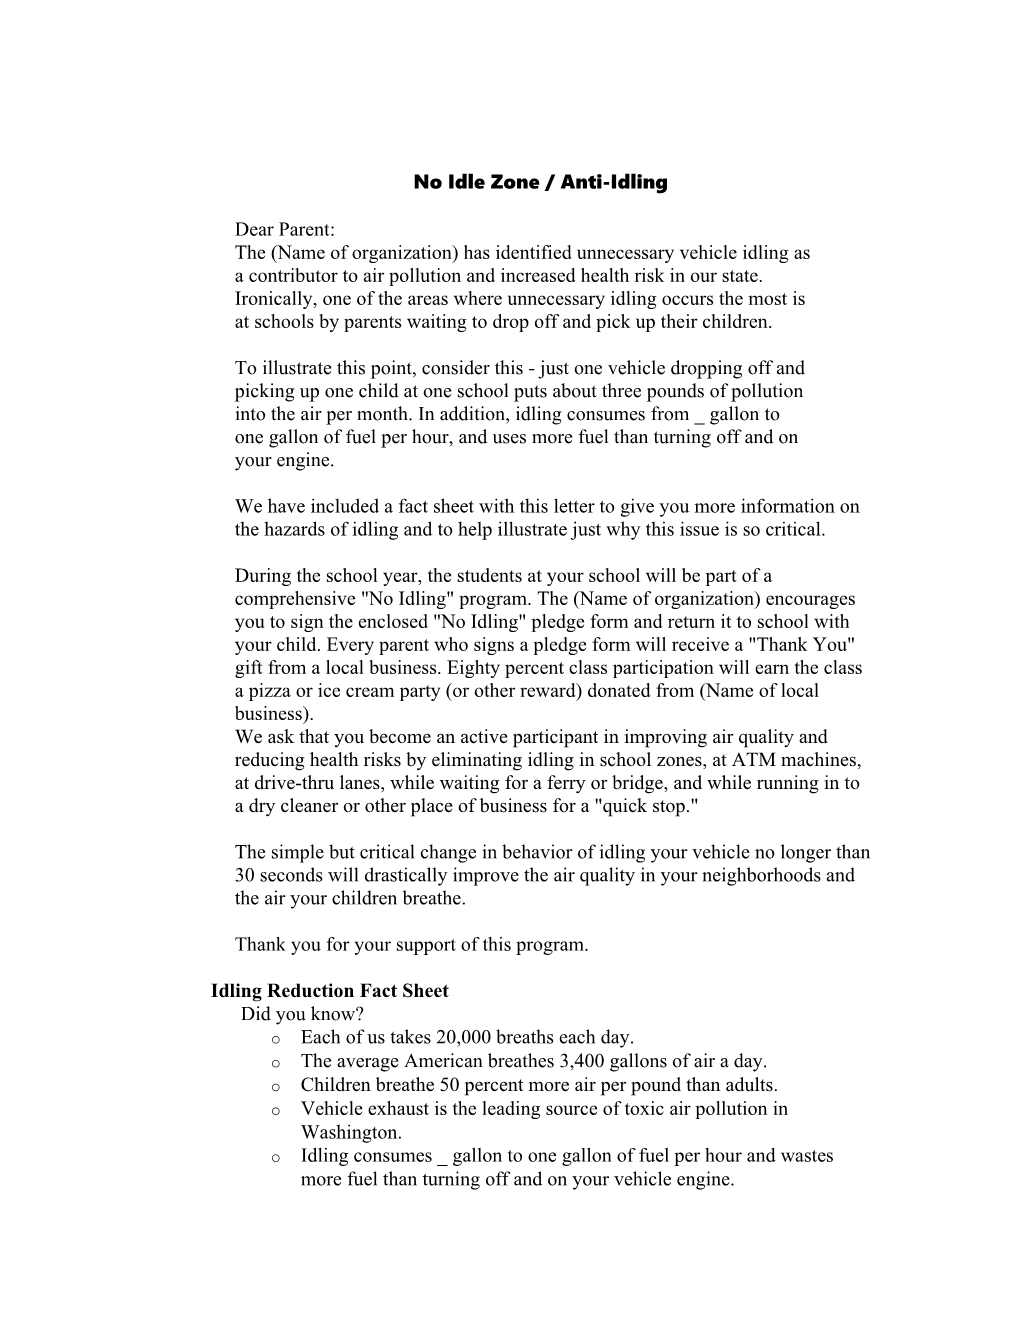 Air Watch Northwest Anti Idling Letter to Parent Template